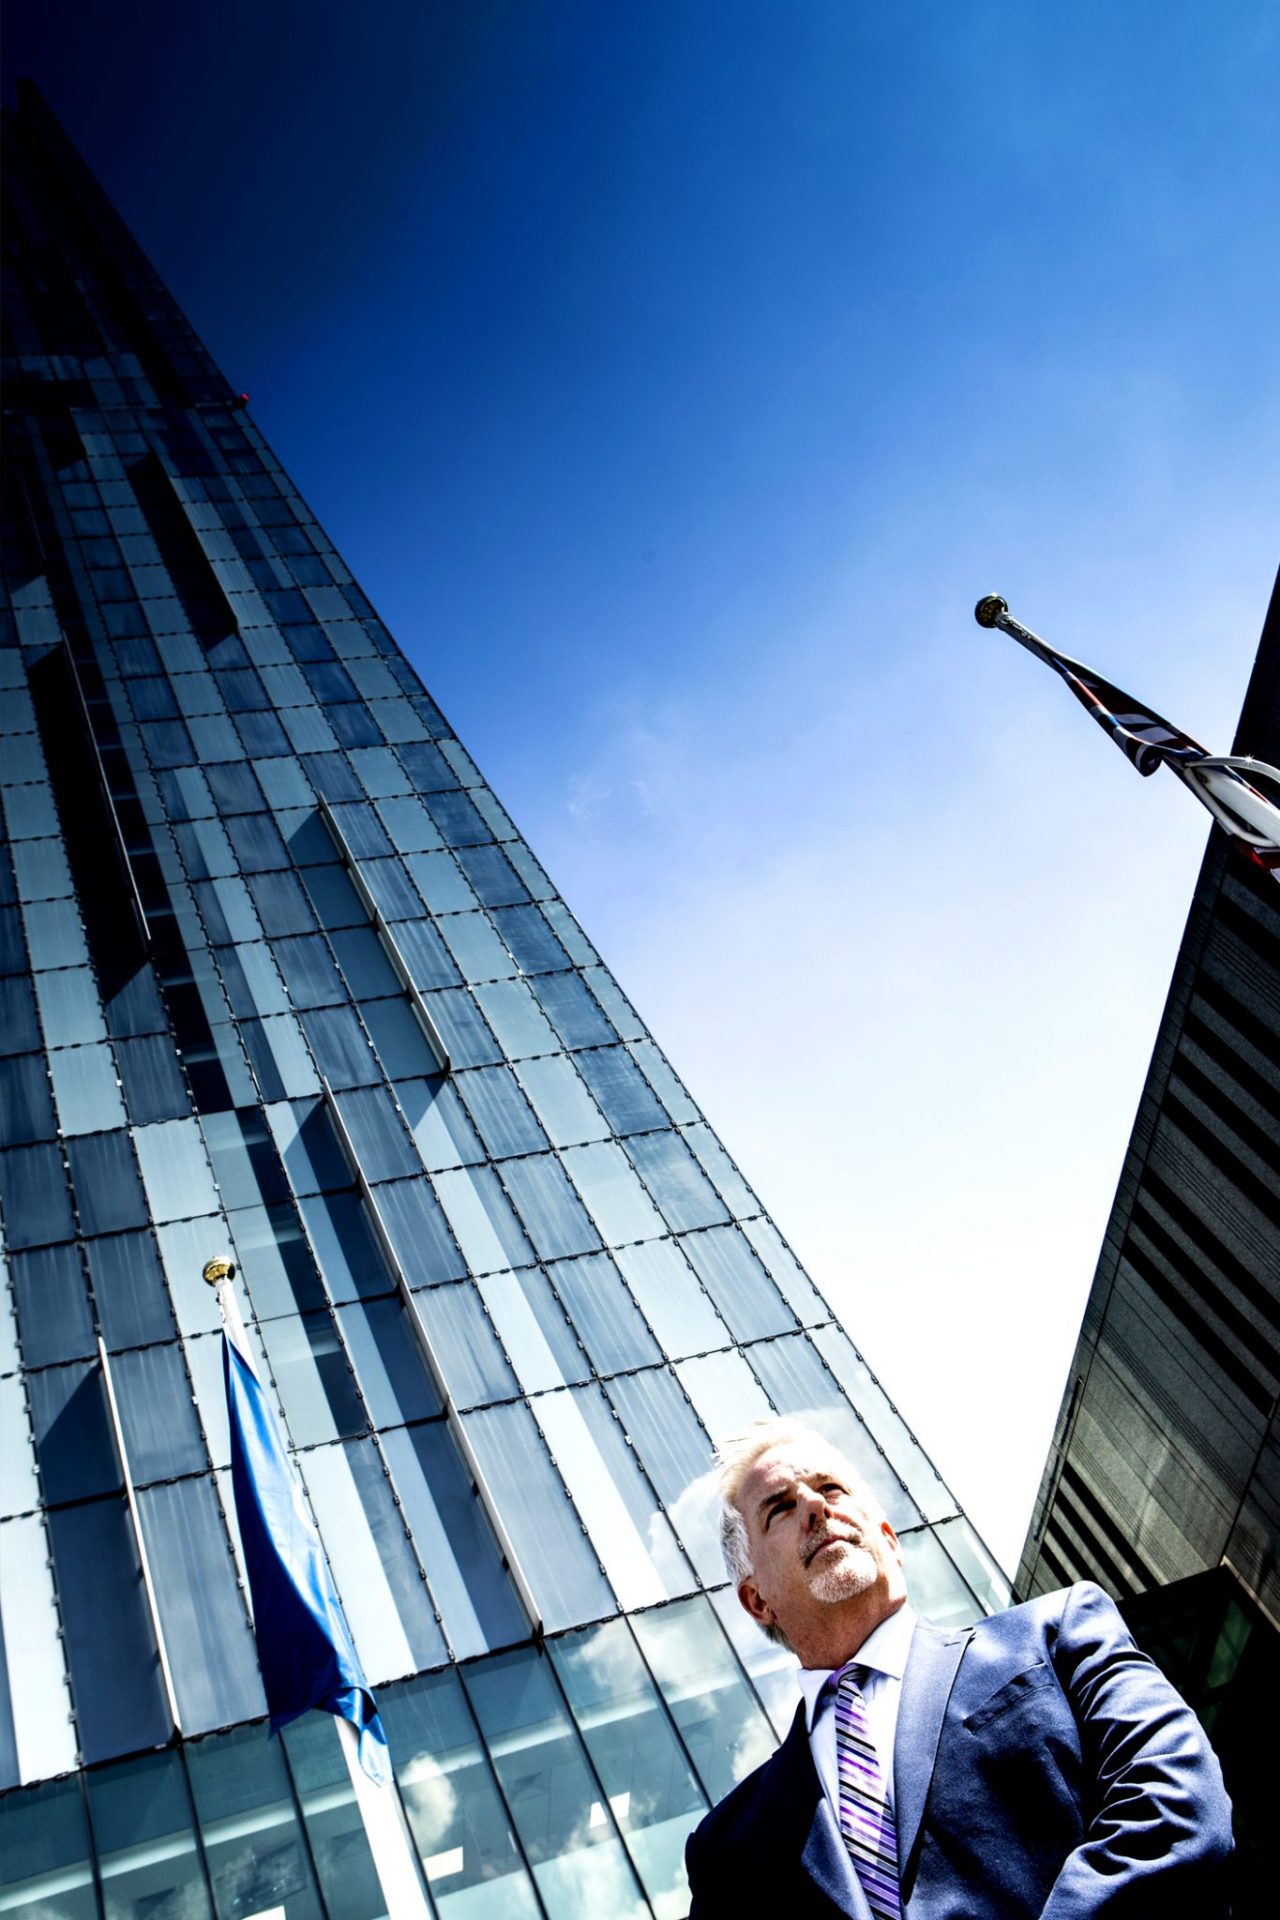 corporate-portrait-photography-on-location-in-manchester